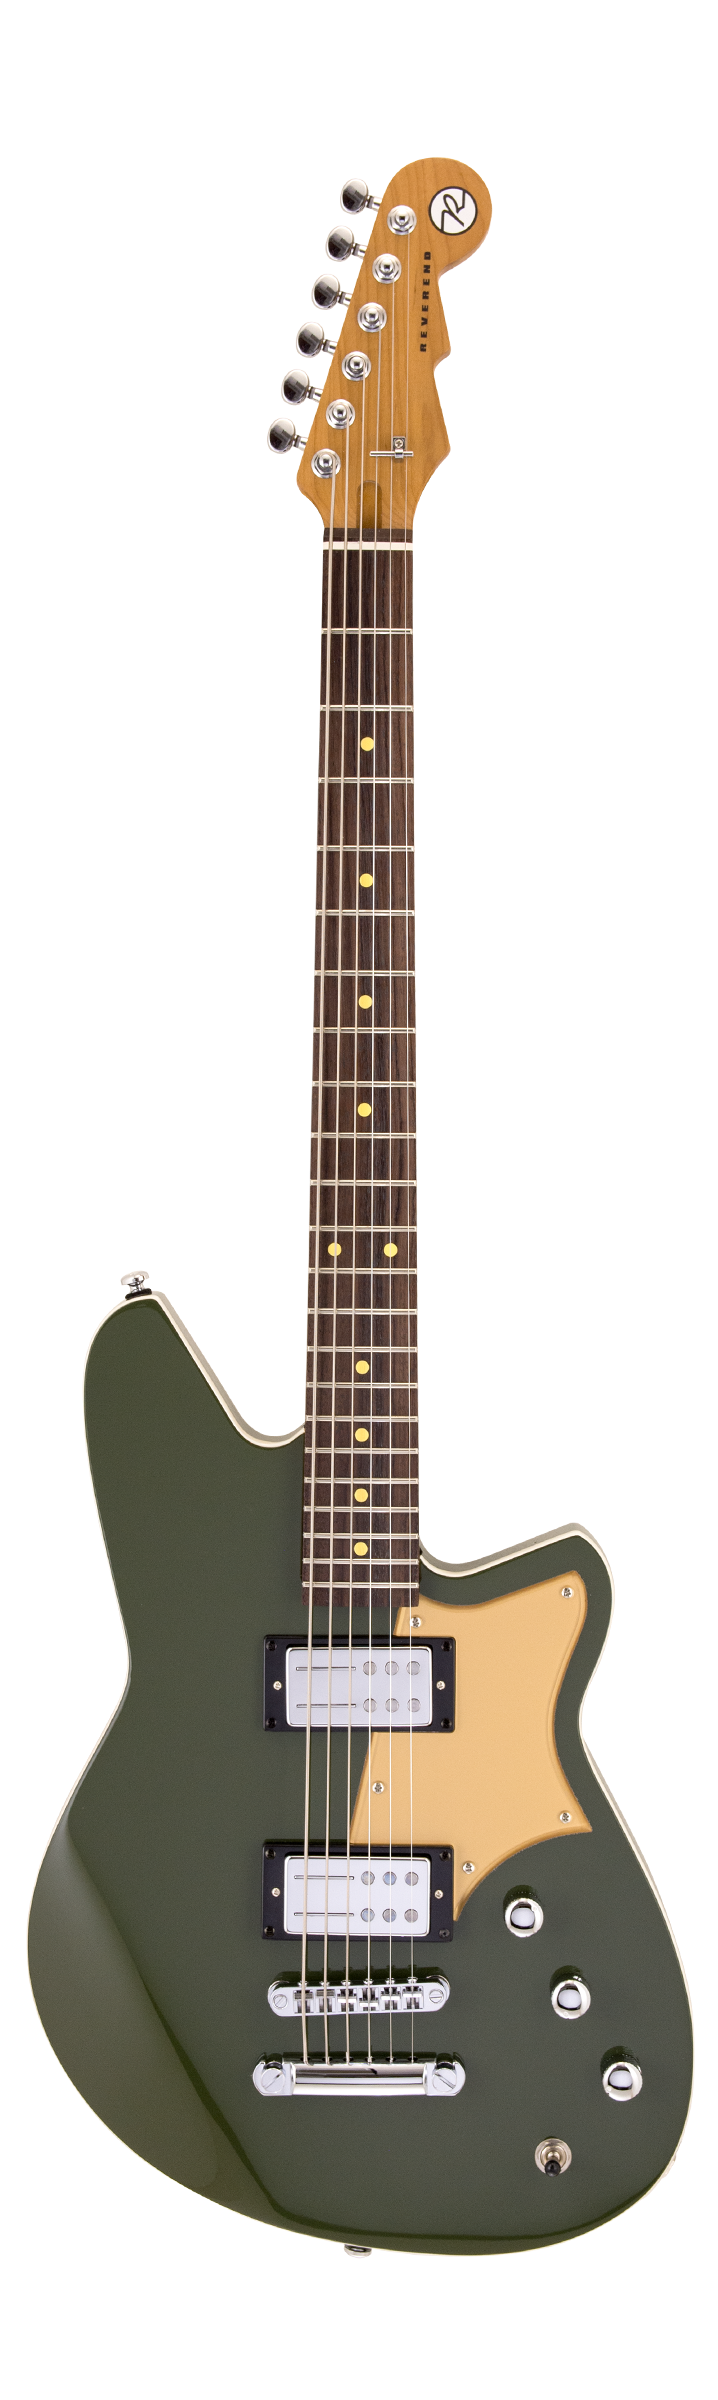 Reverend DESCENT RA Electric Guitar (Army Green)